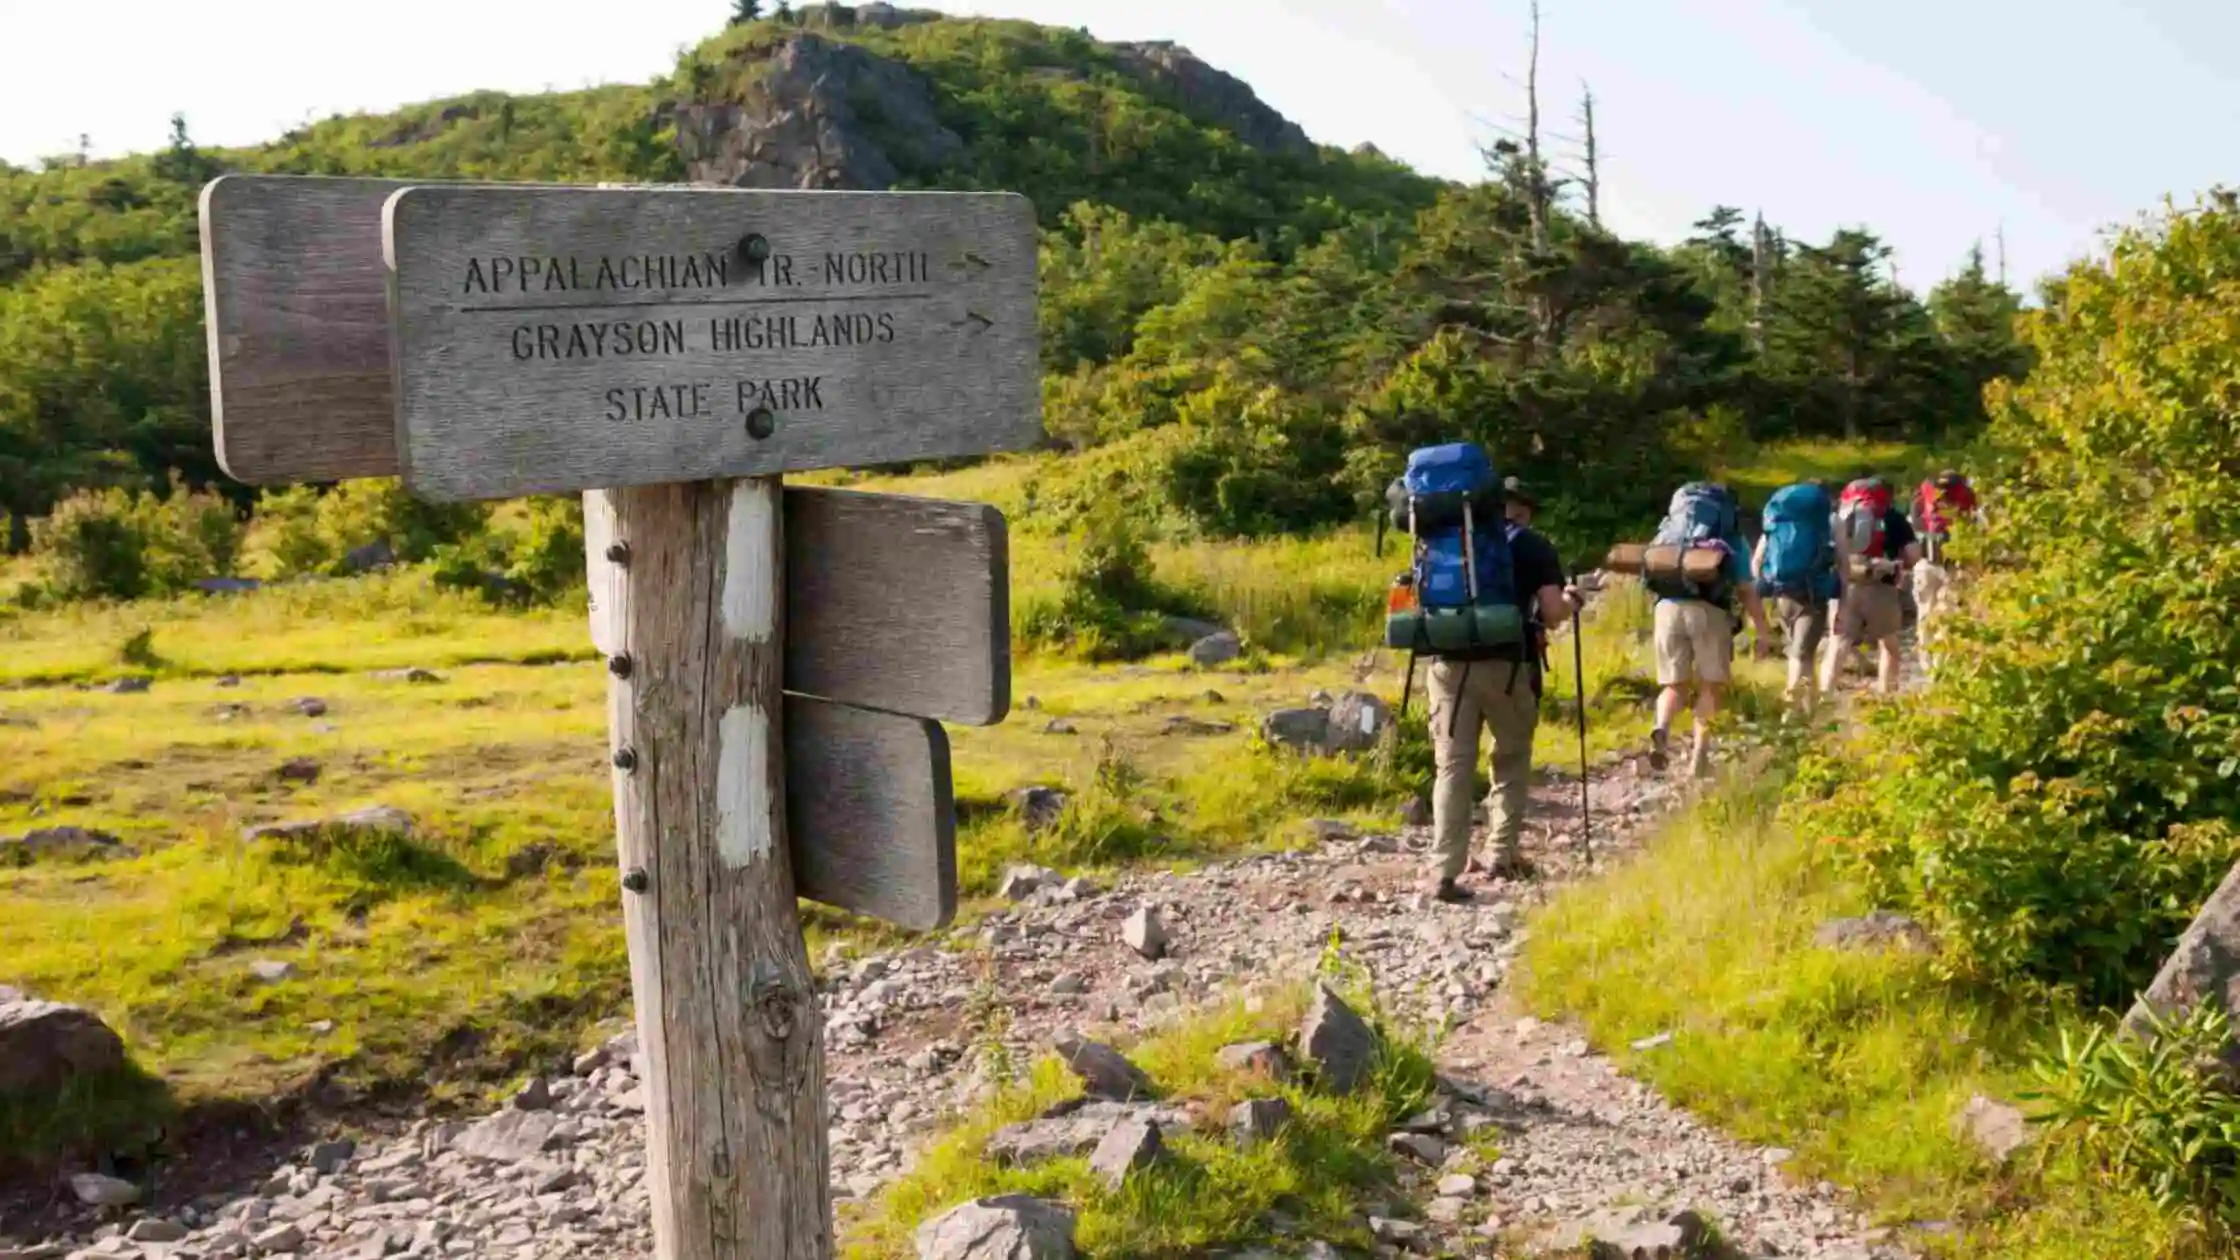 How Long Does it Take to Hike the Appalachian Trail?